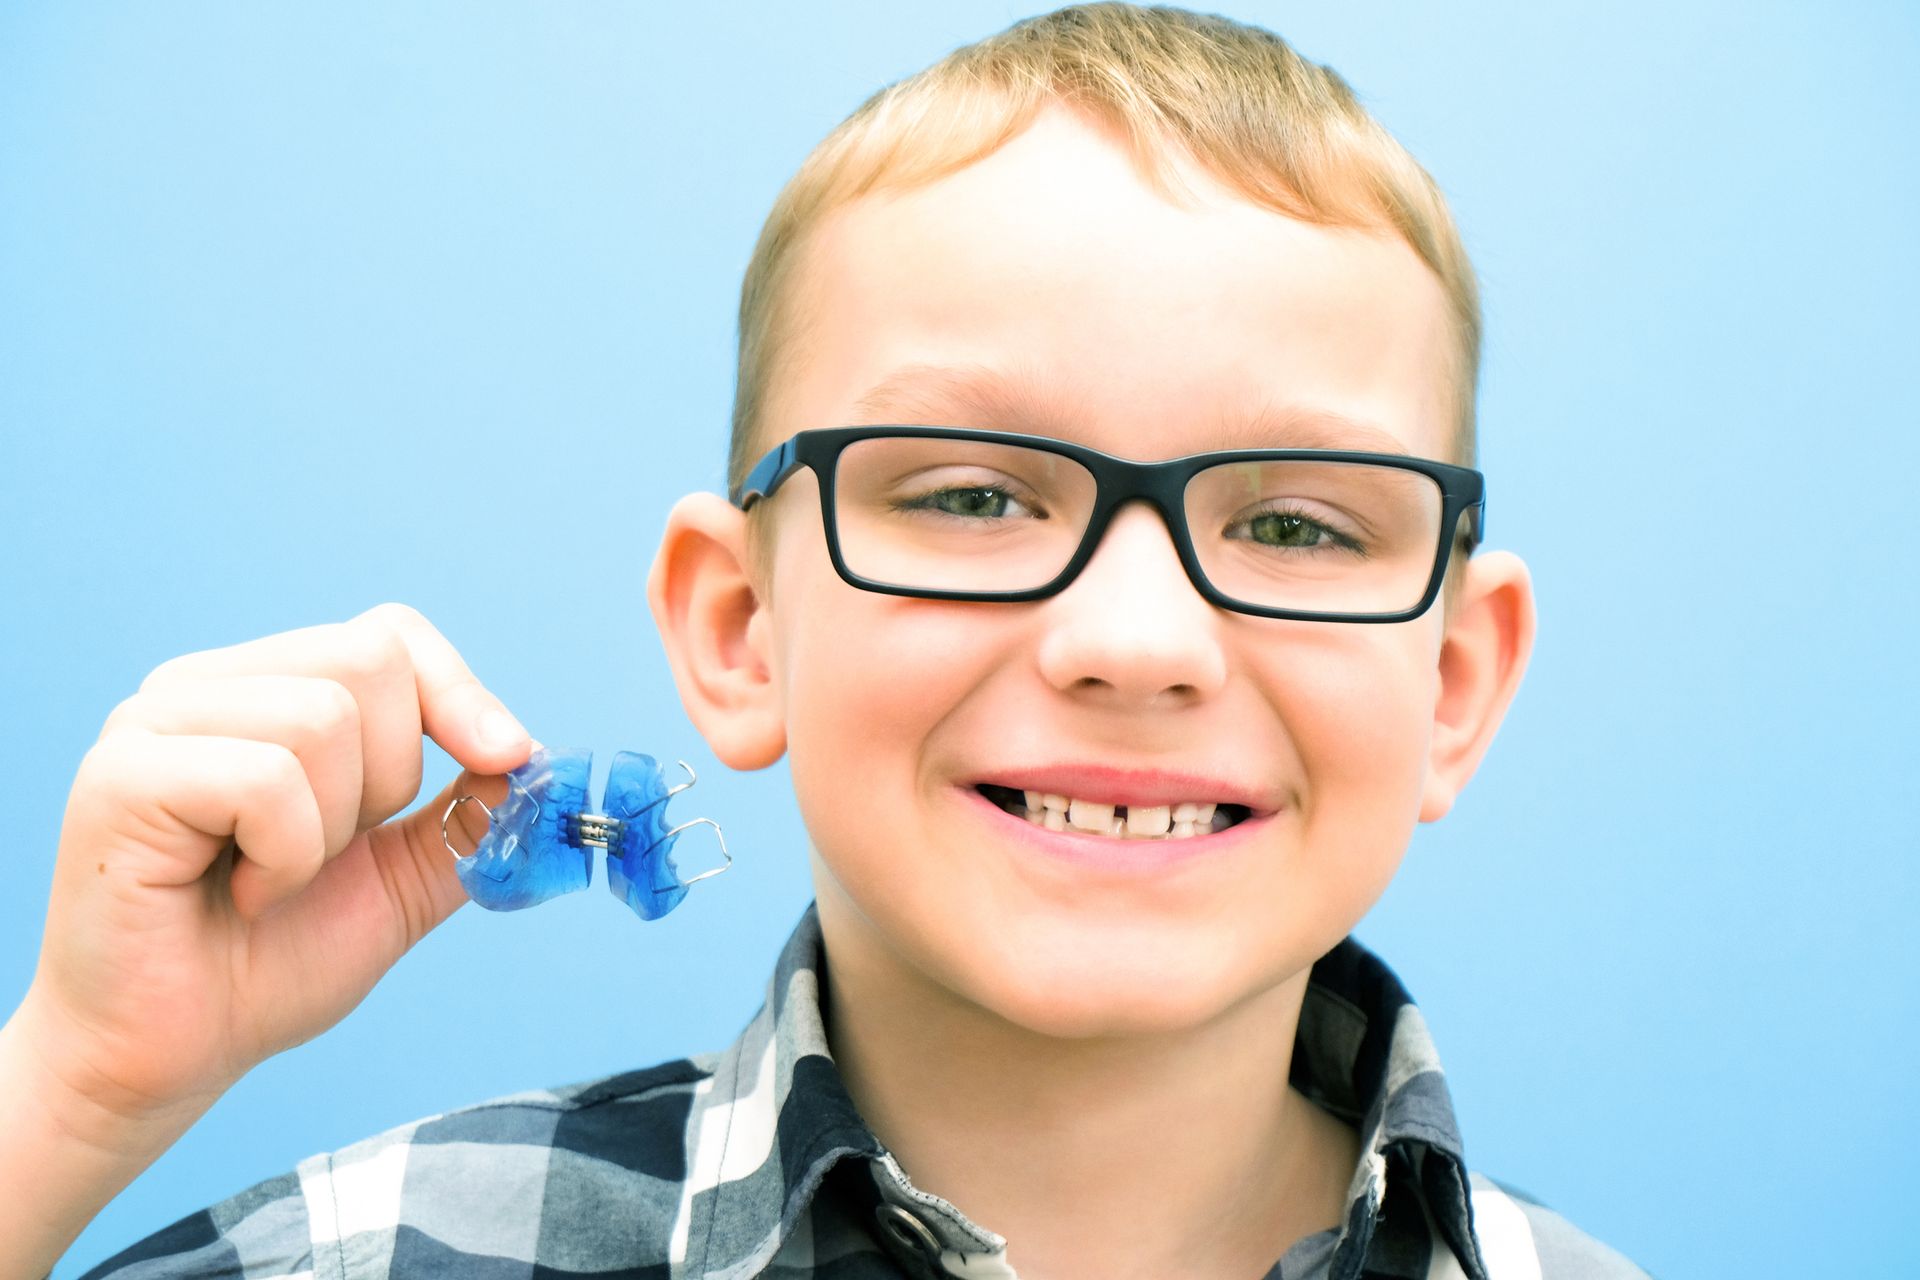 A young boy wearing glasses is holding a retainer in his hand.